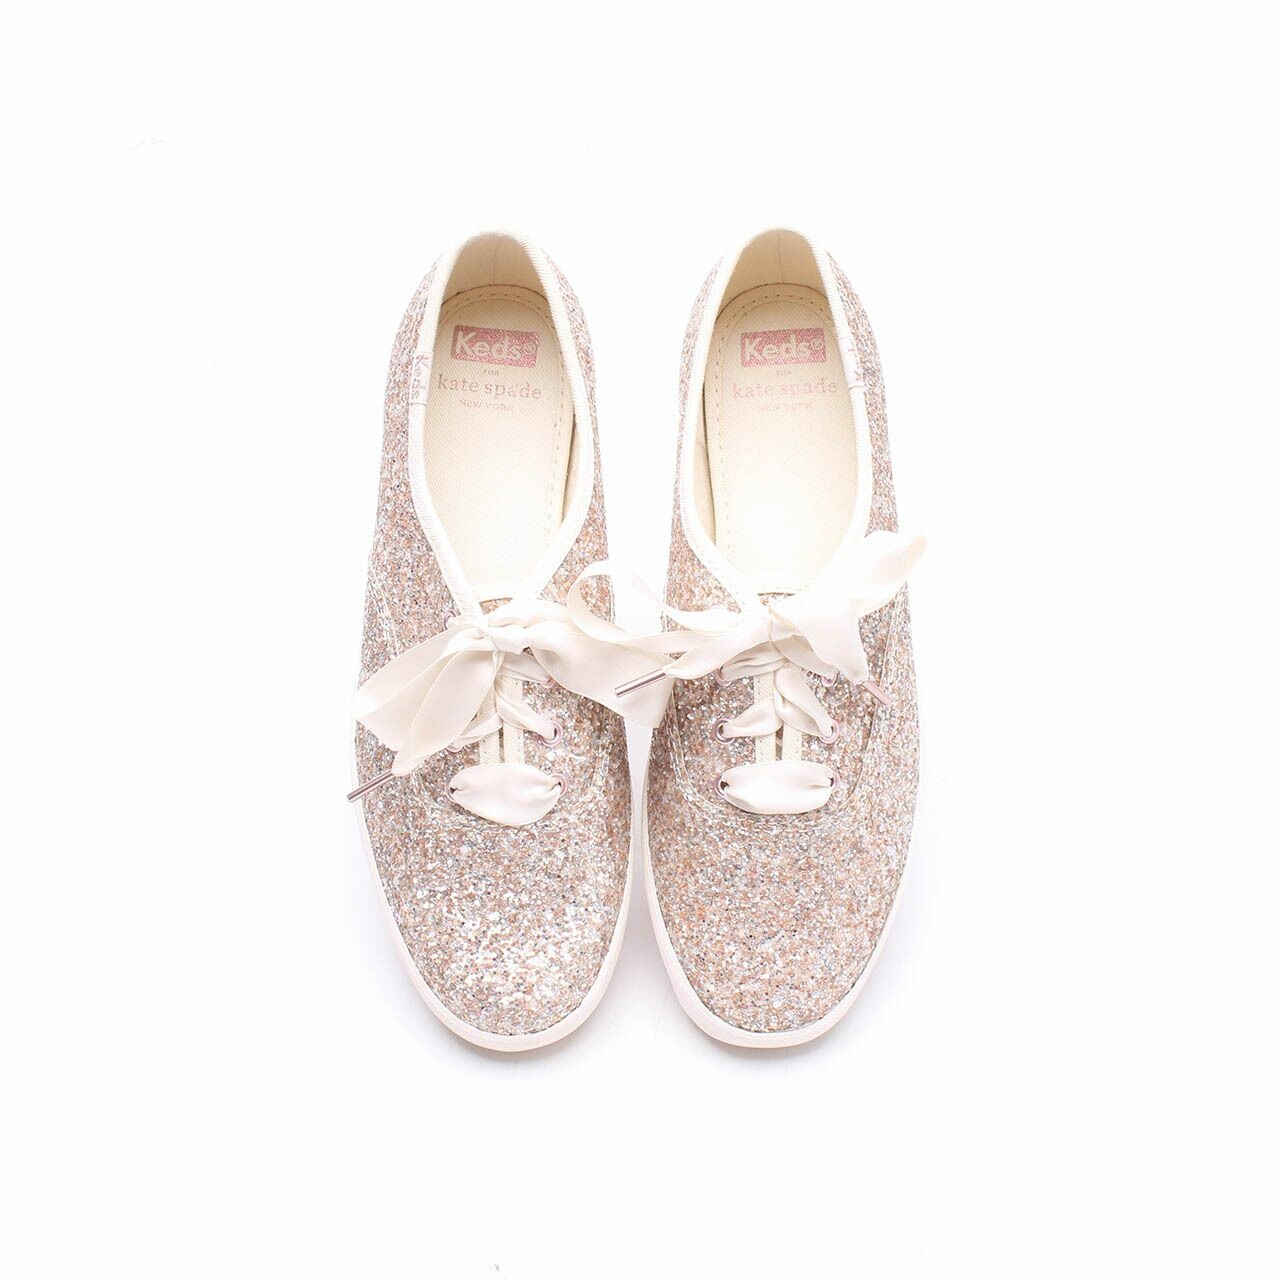 Keds For Kate Spade Champion Gold White Glitter Sneakers